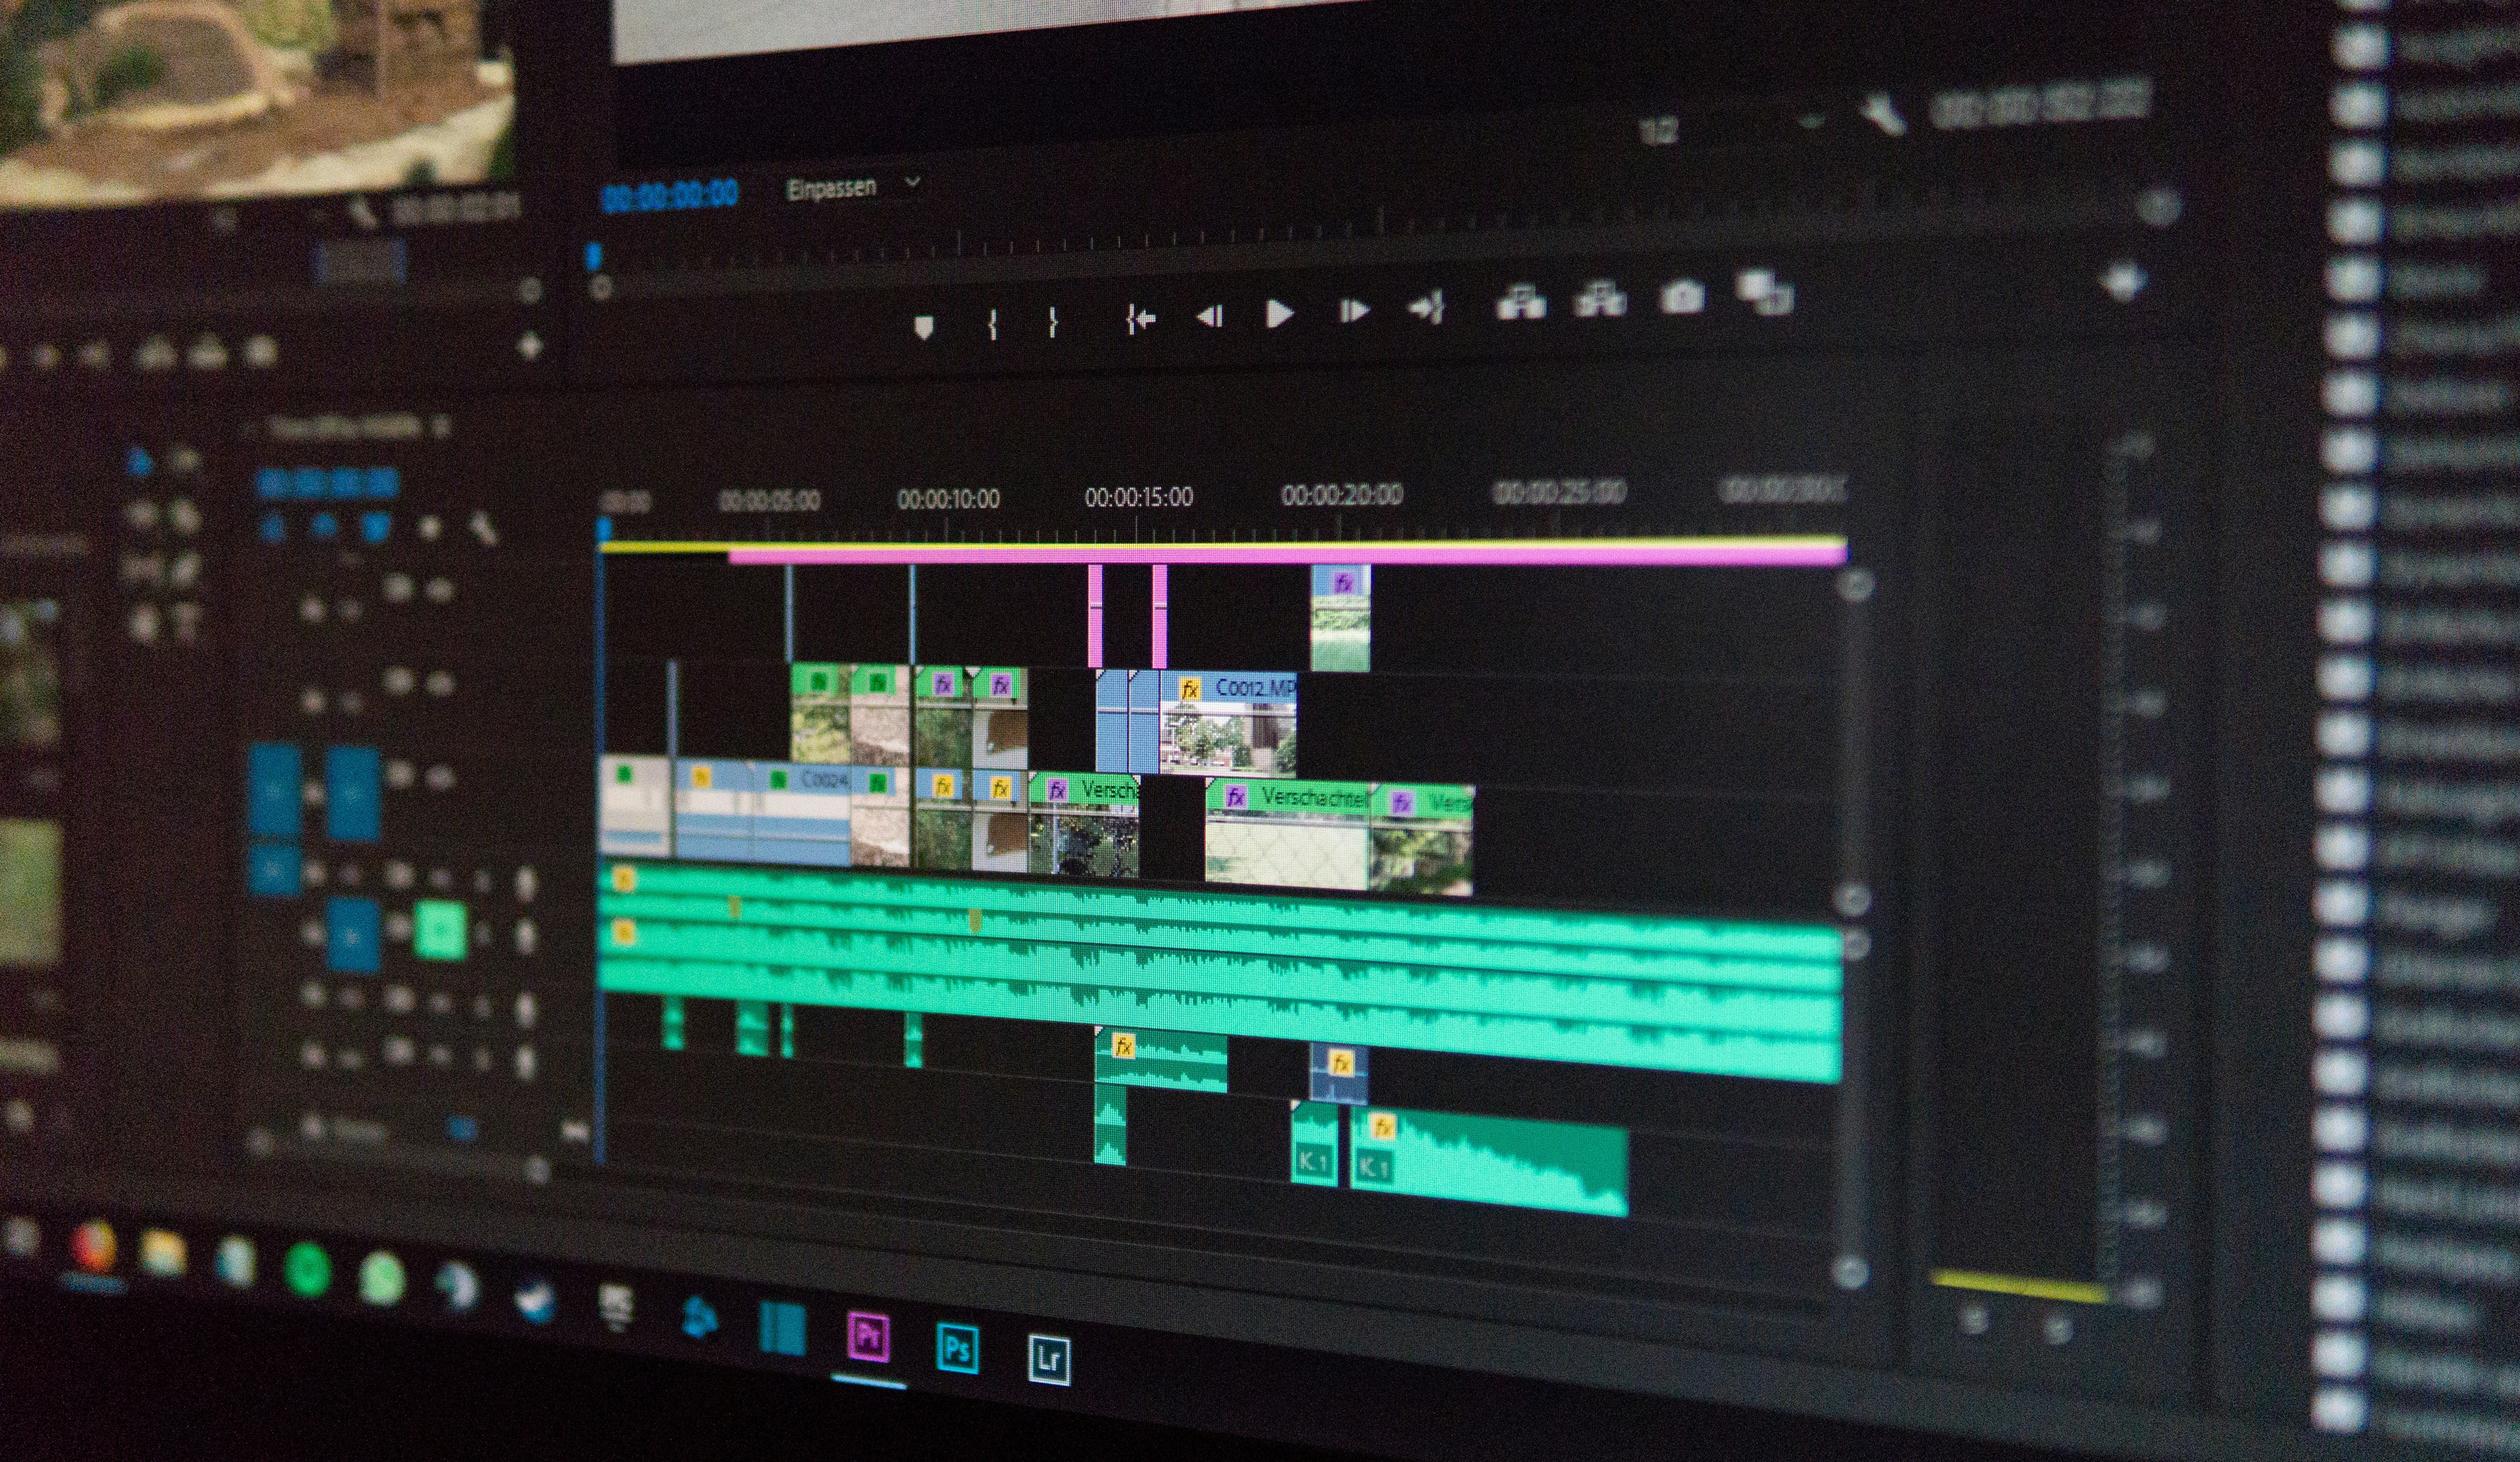 How to master Final Cut Pro? Here's some free tutorial to learn together!